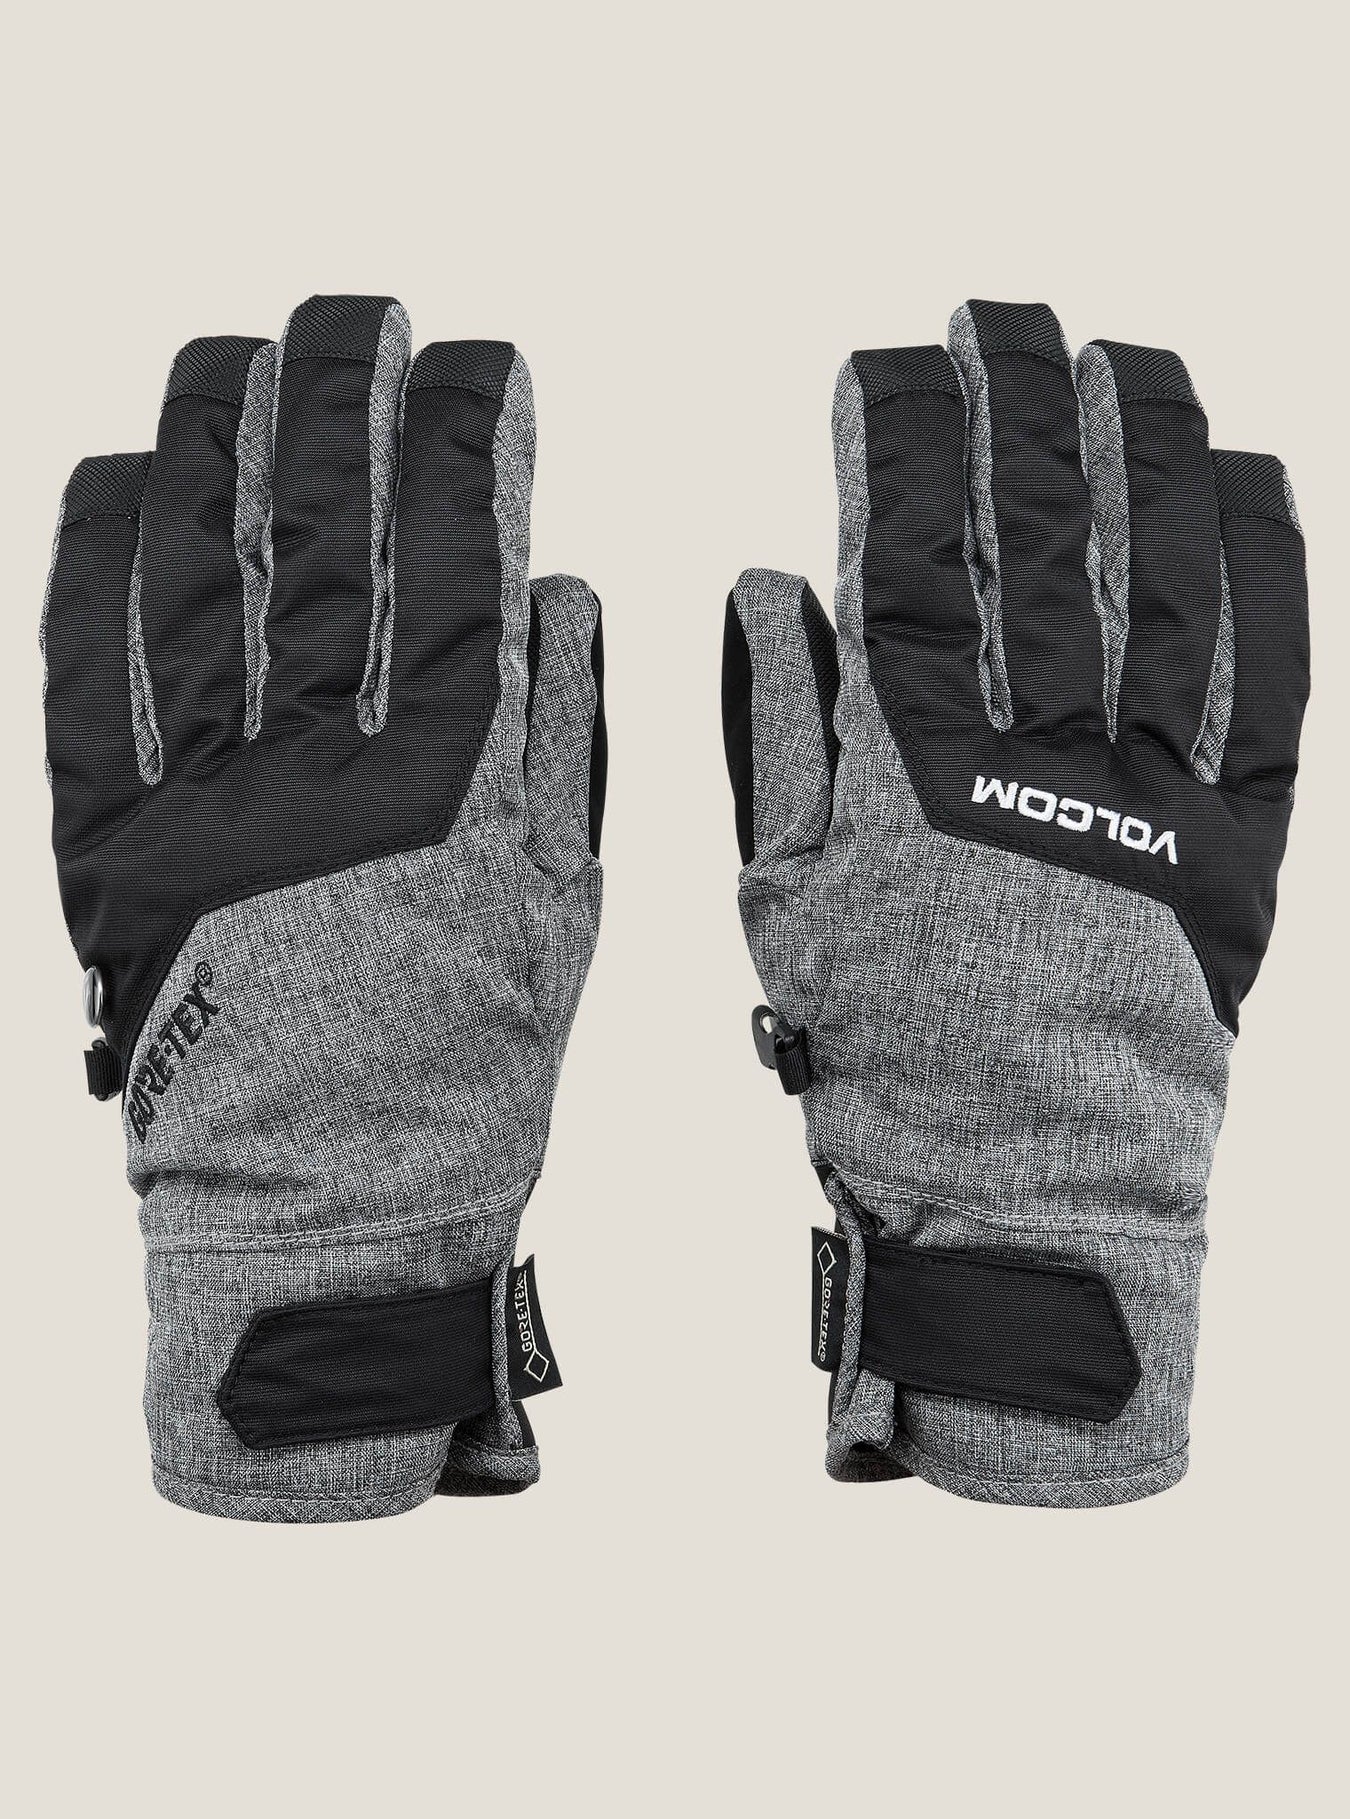 Shop Winter Gloves at launch Cable park